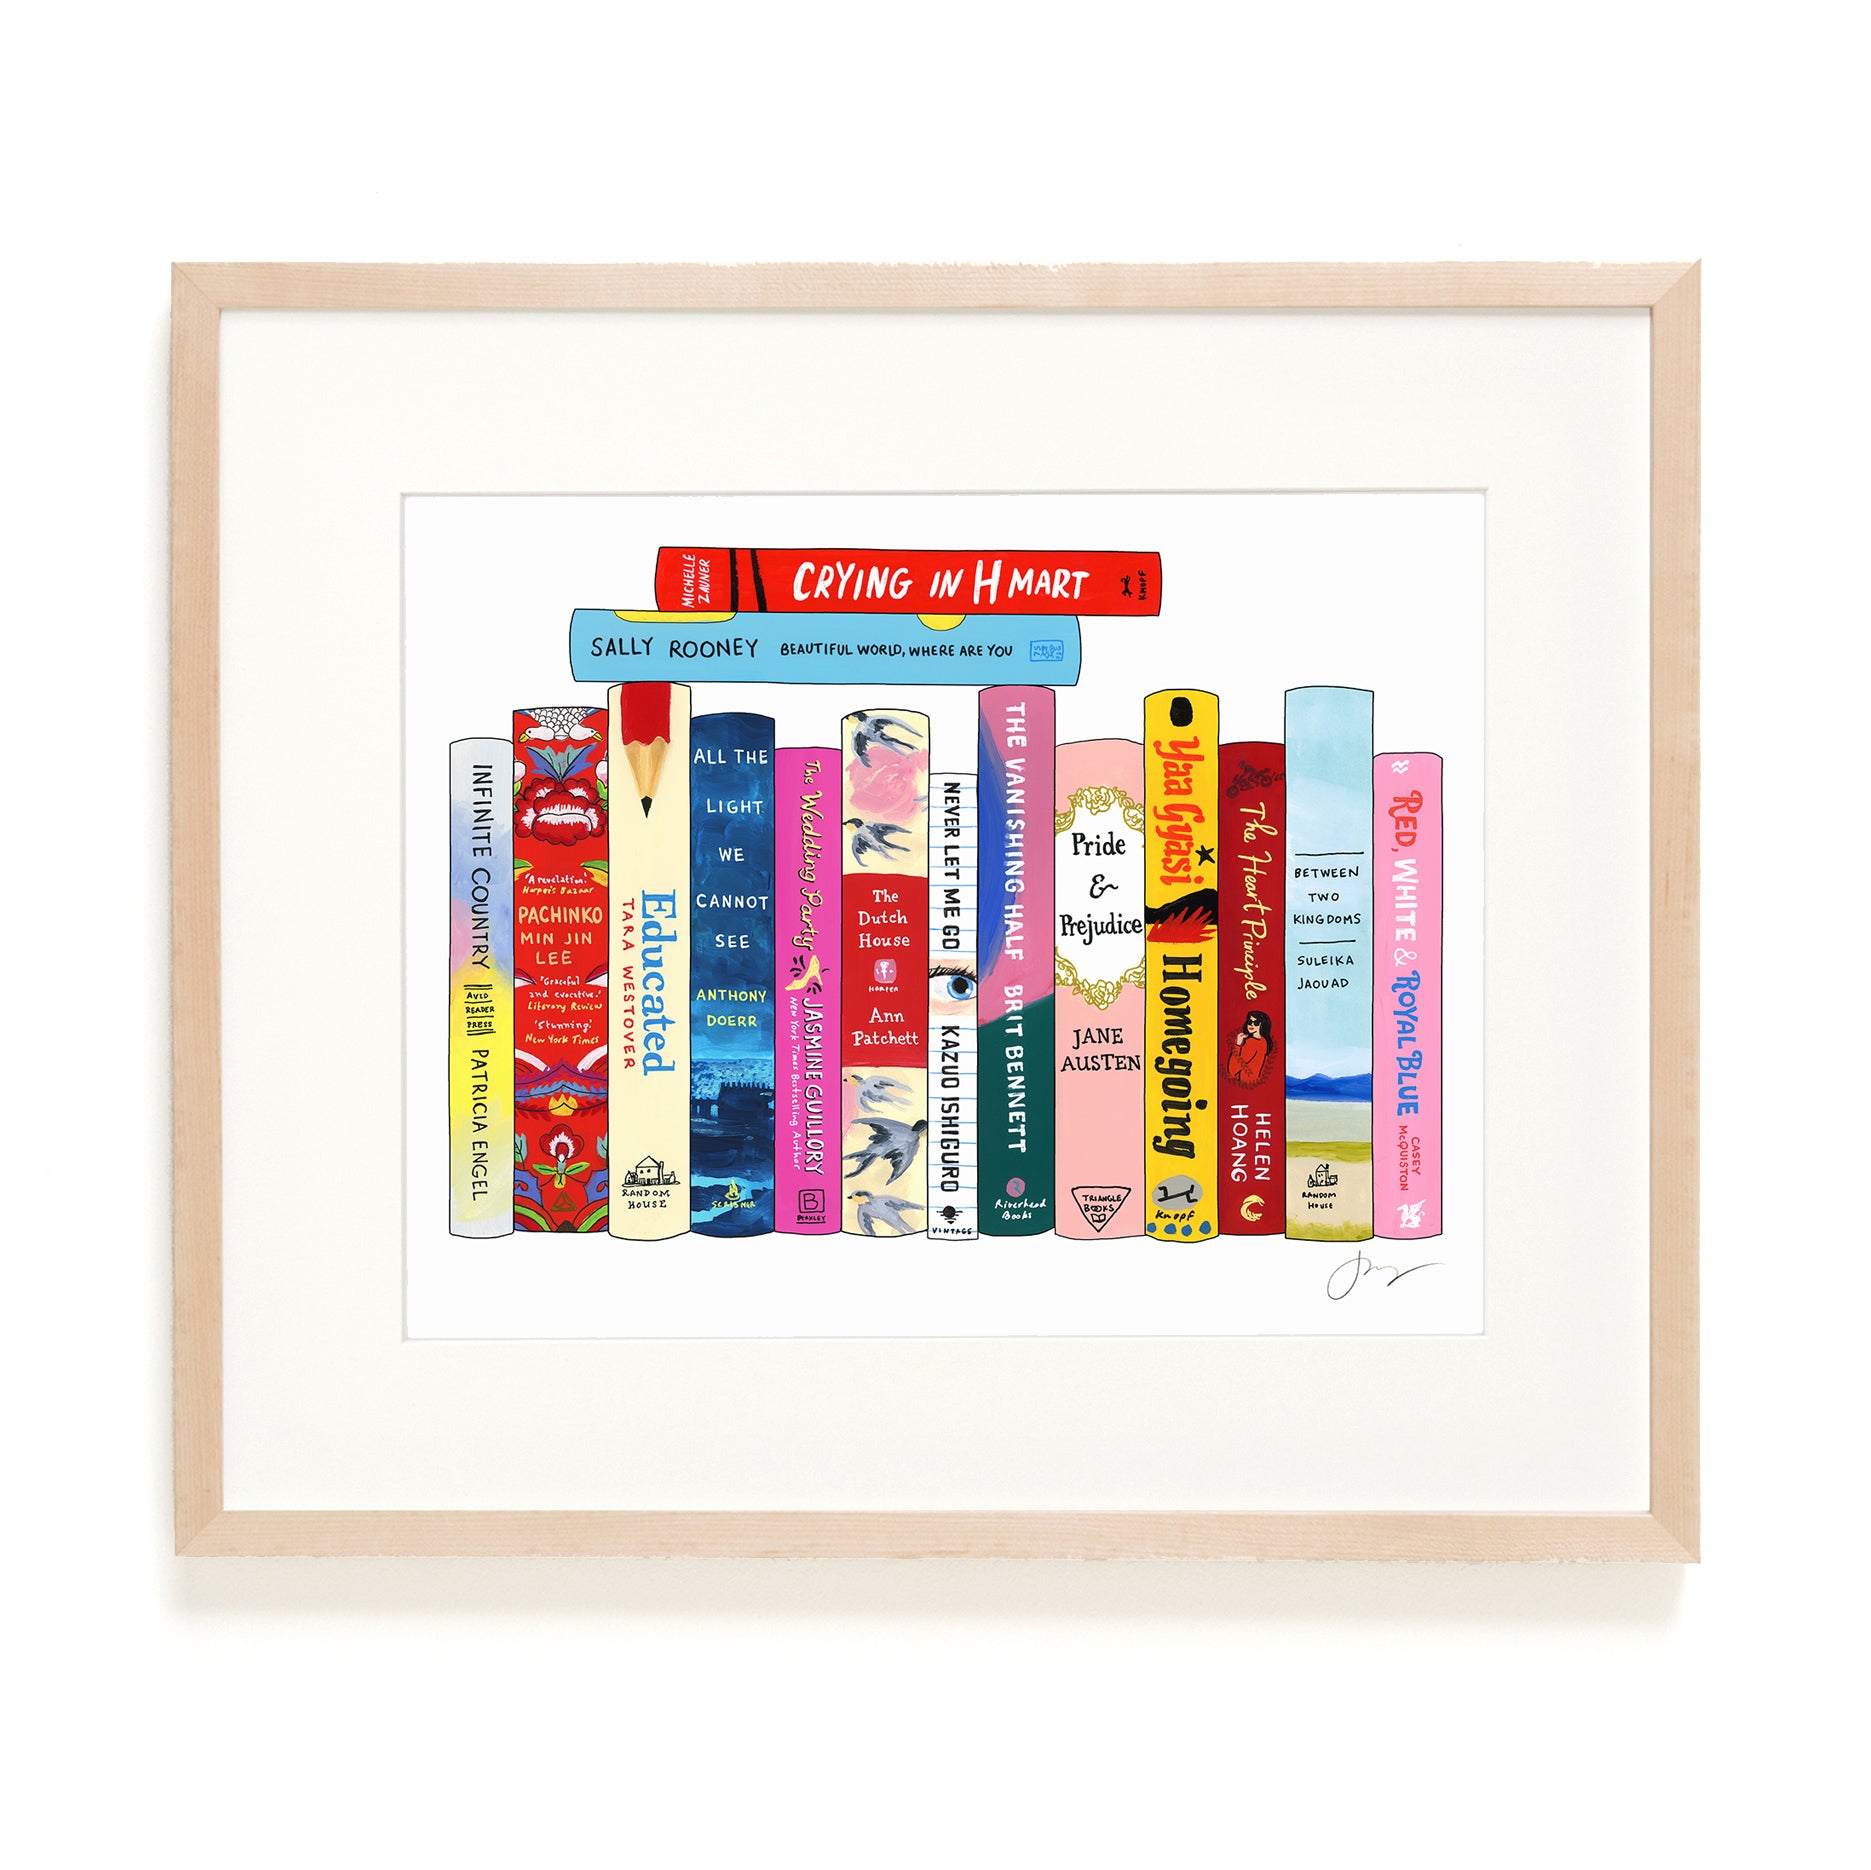 Books are my Happy Place Art Print | art on book page | bookworm gift |  bookish decor | wall decor | book art | bookish merch | book lover